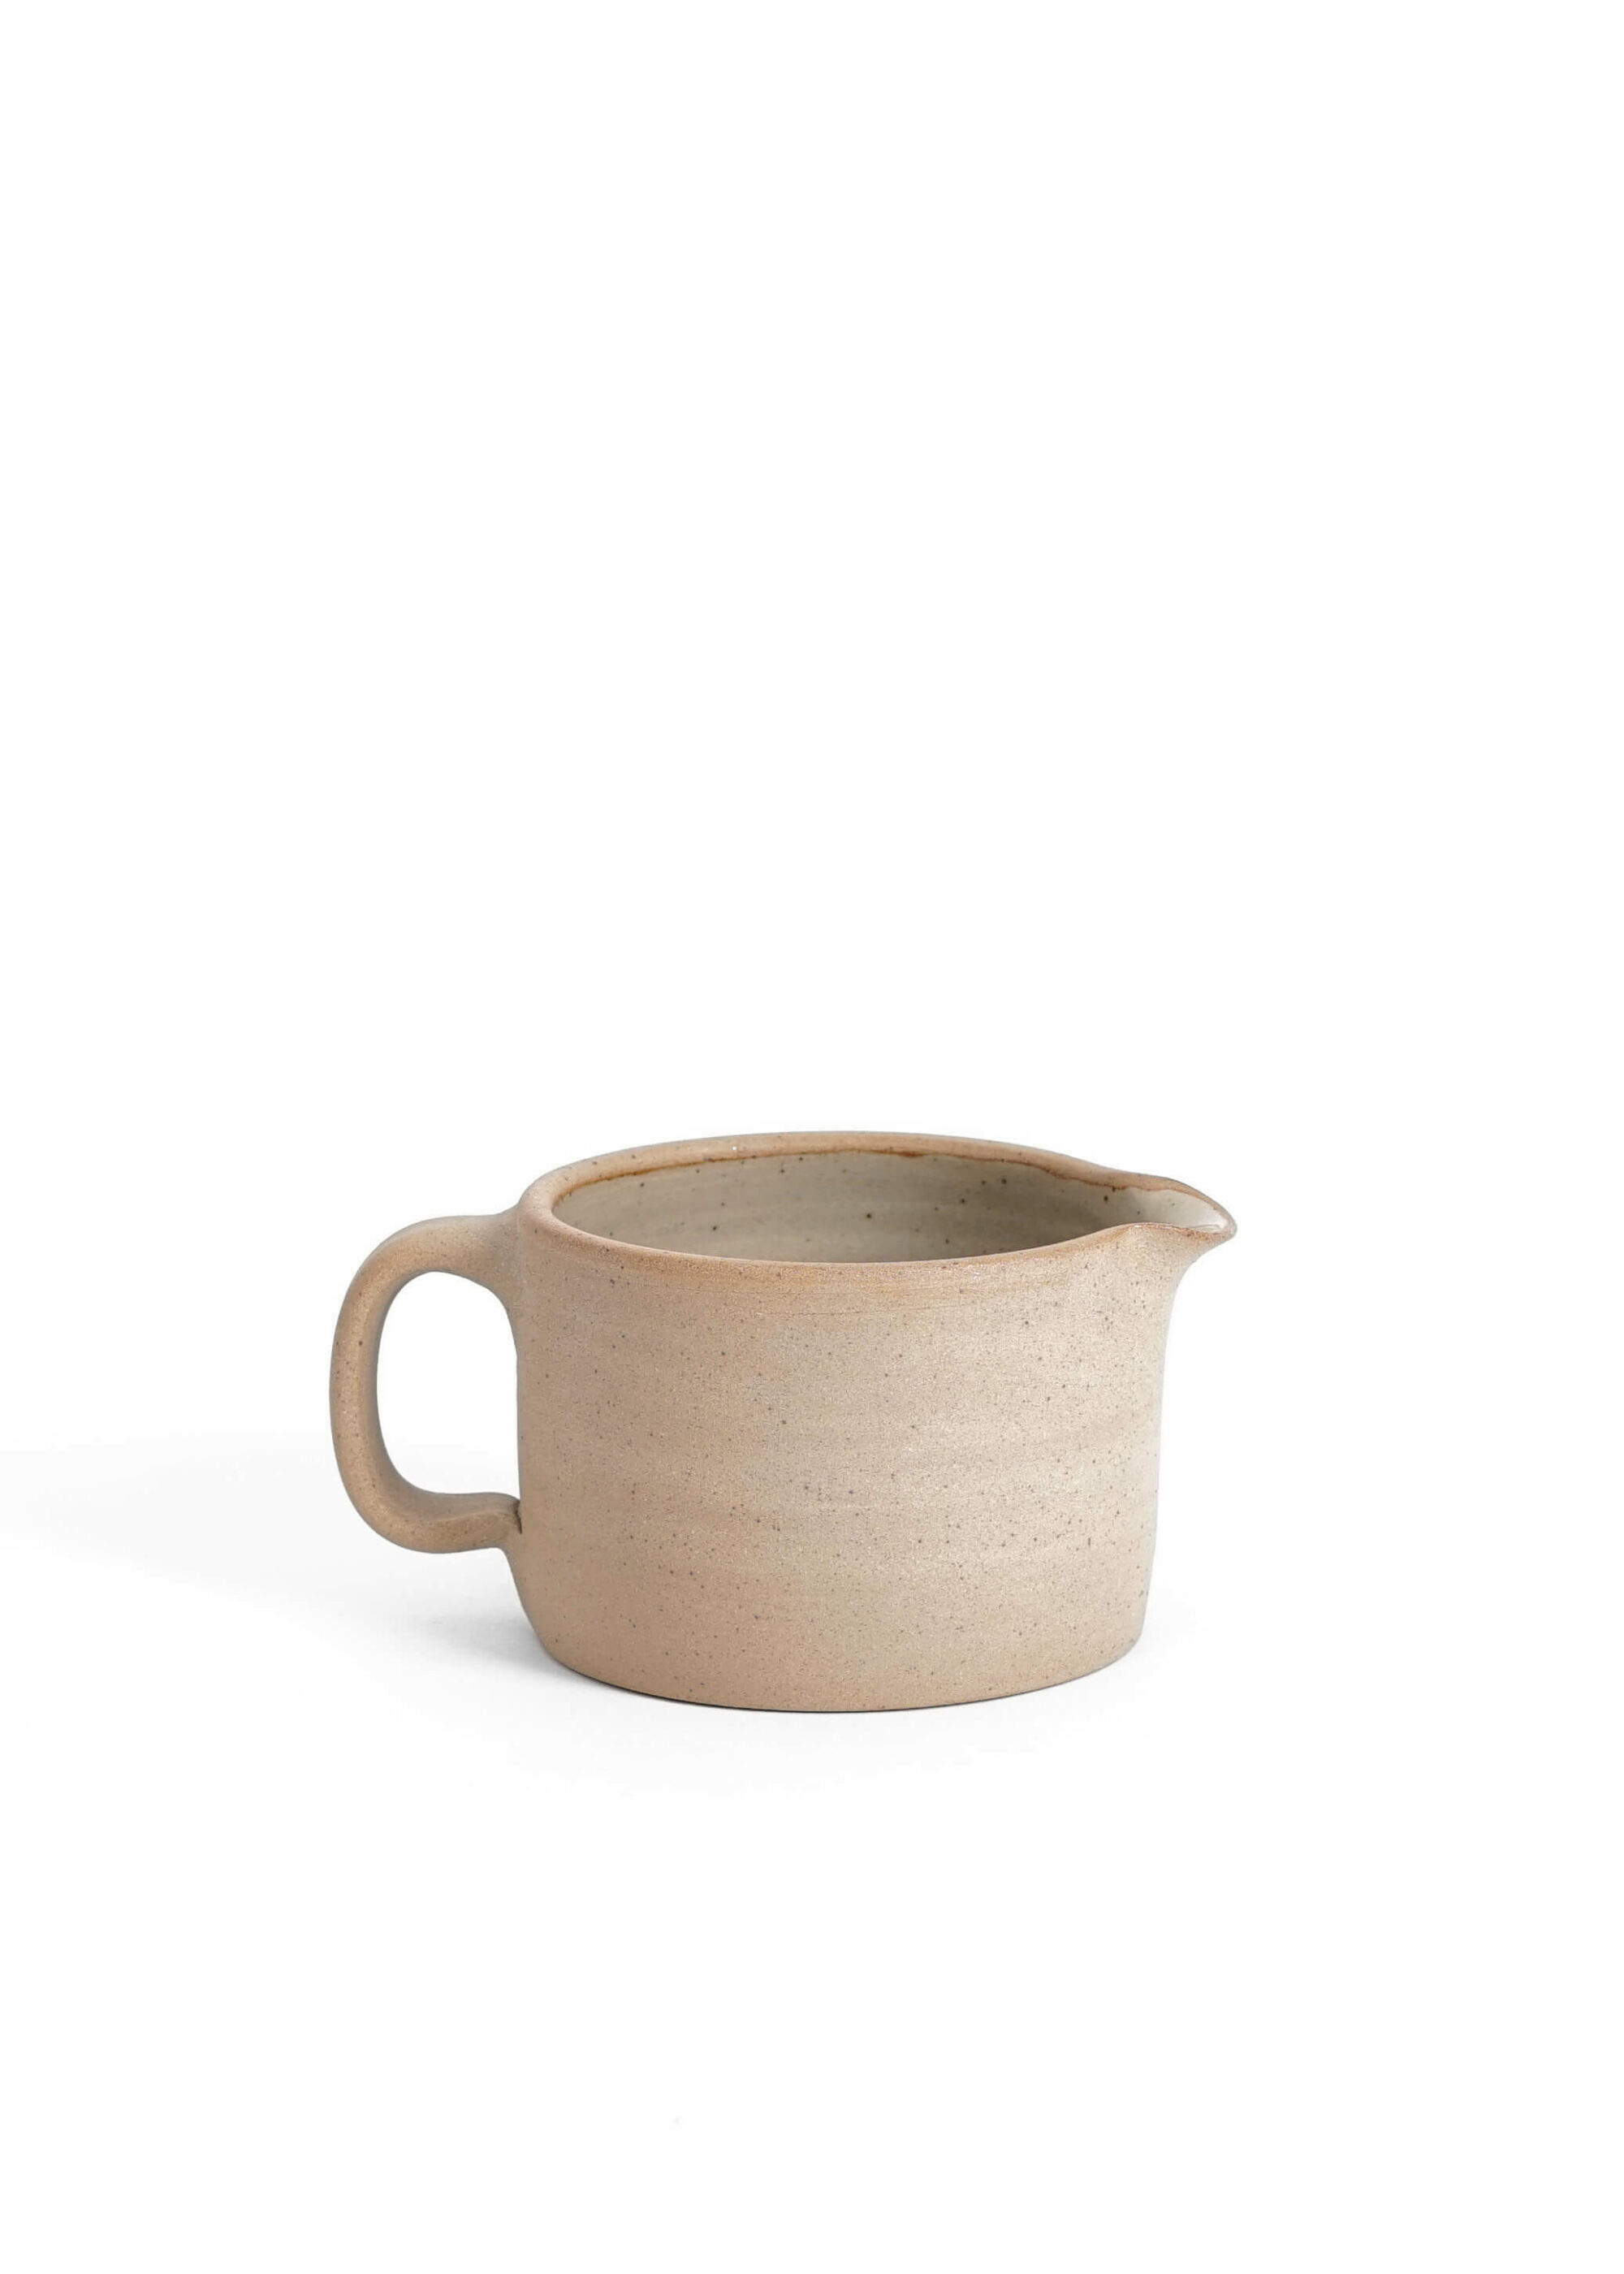 Product image for »Beuys« Milk & Sauce Stoneware Jug